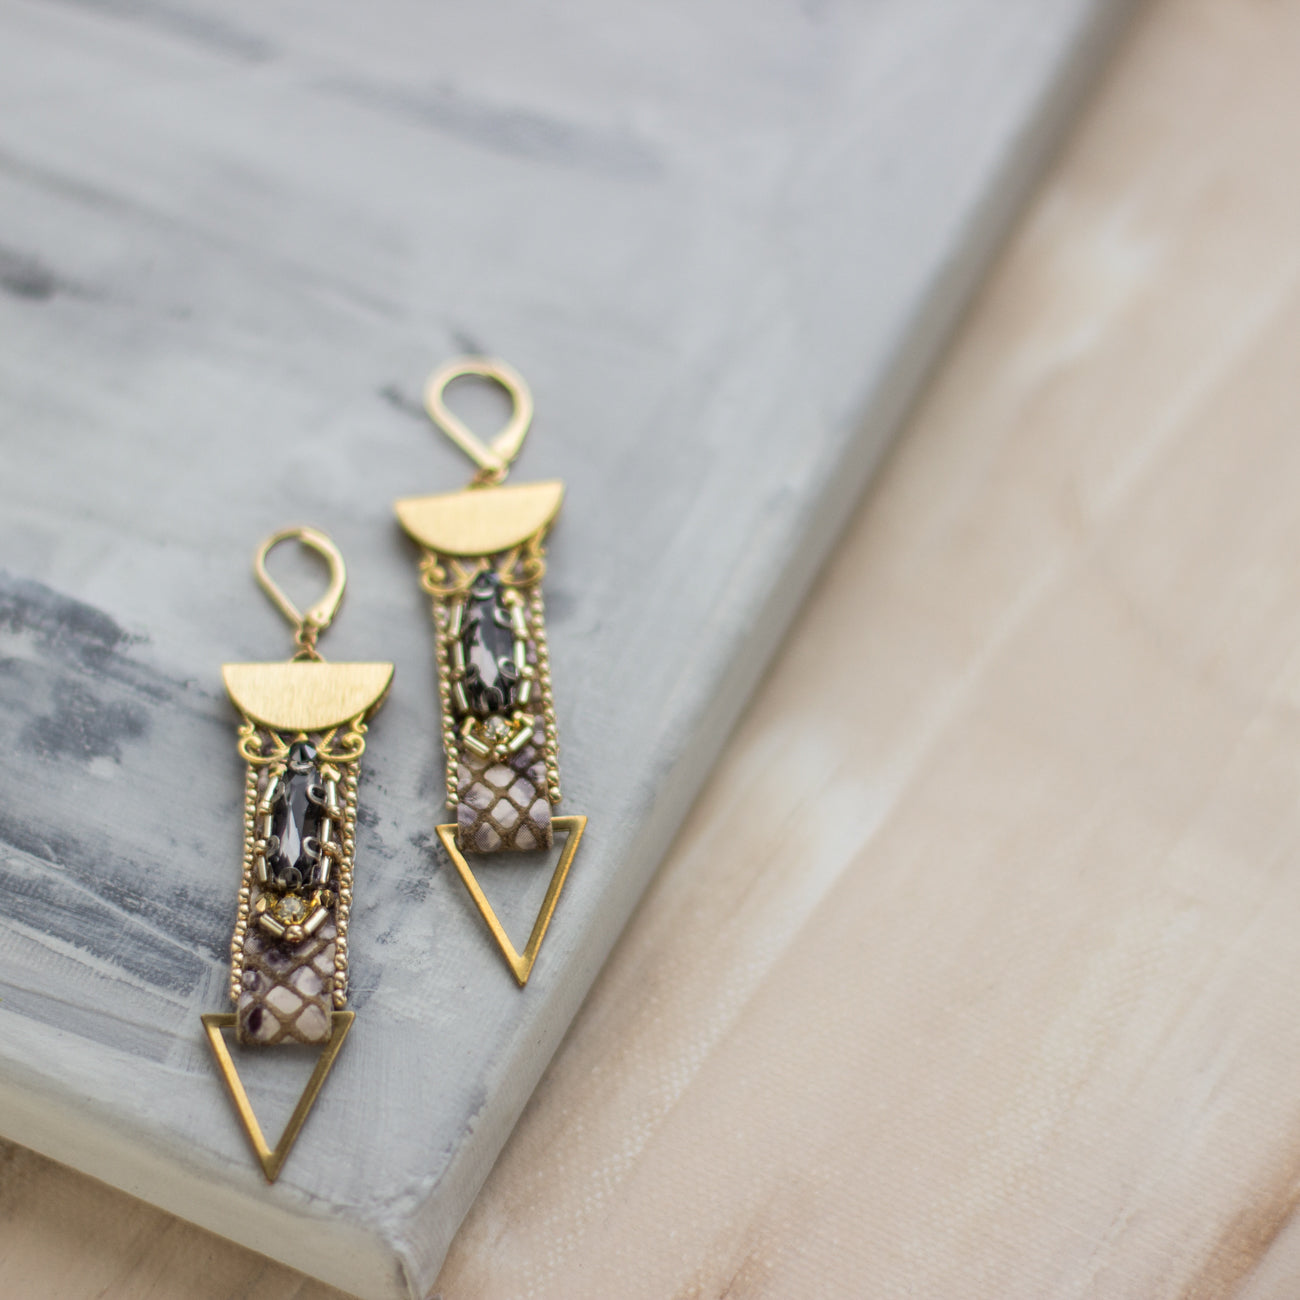 Shop women's jewelry at LeFlowers Bijouterie to discover unique handmade pieces for your wardrobe. Fancy geometric earrings. Gold earrings. Crystal earrings. Leather earrings. Snake skin earrings. OOAK jewelry. Handmade accessories